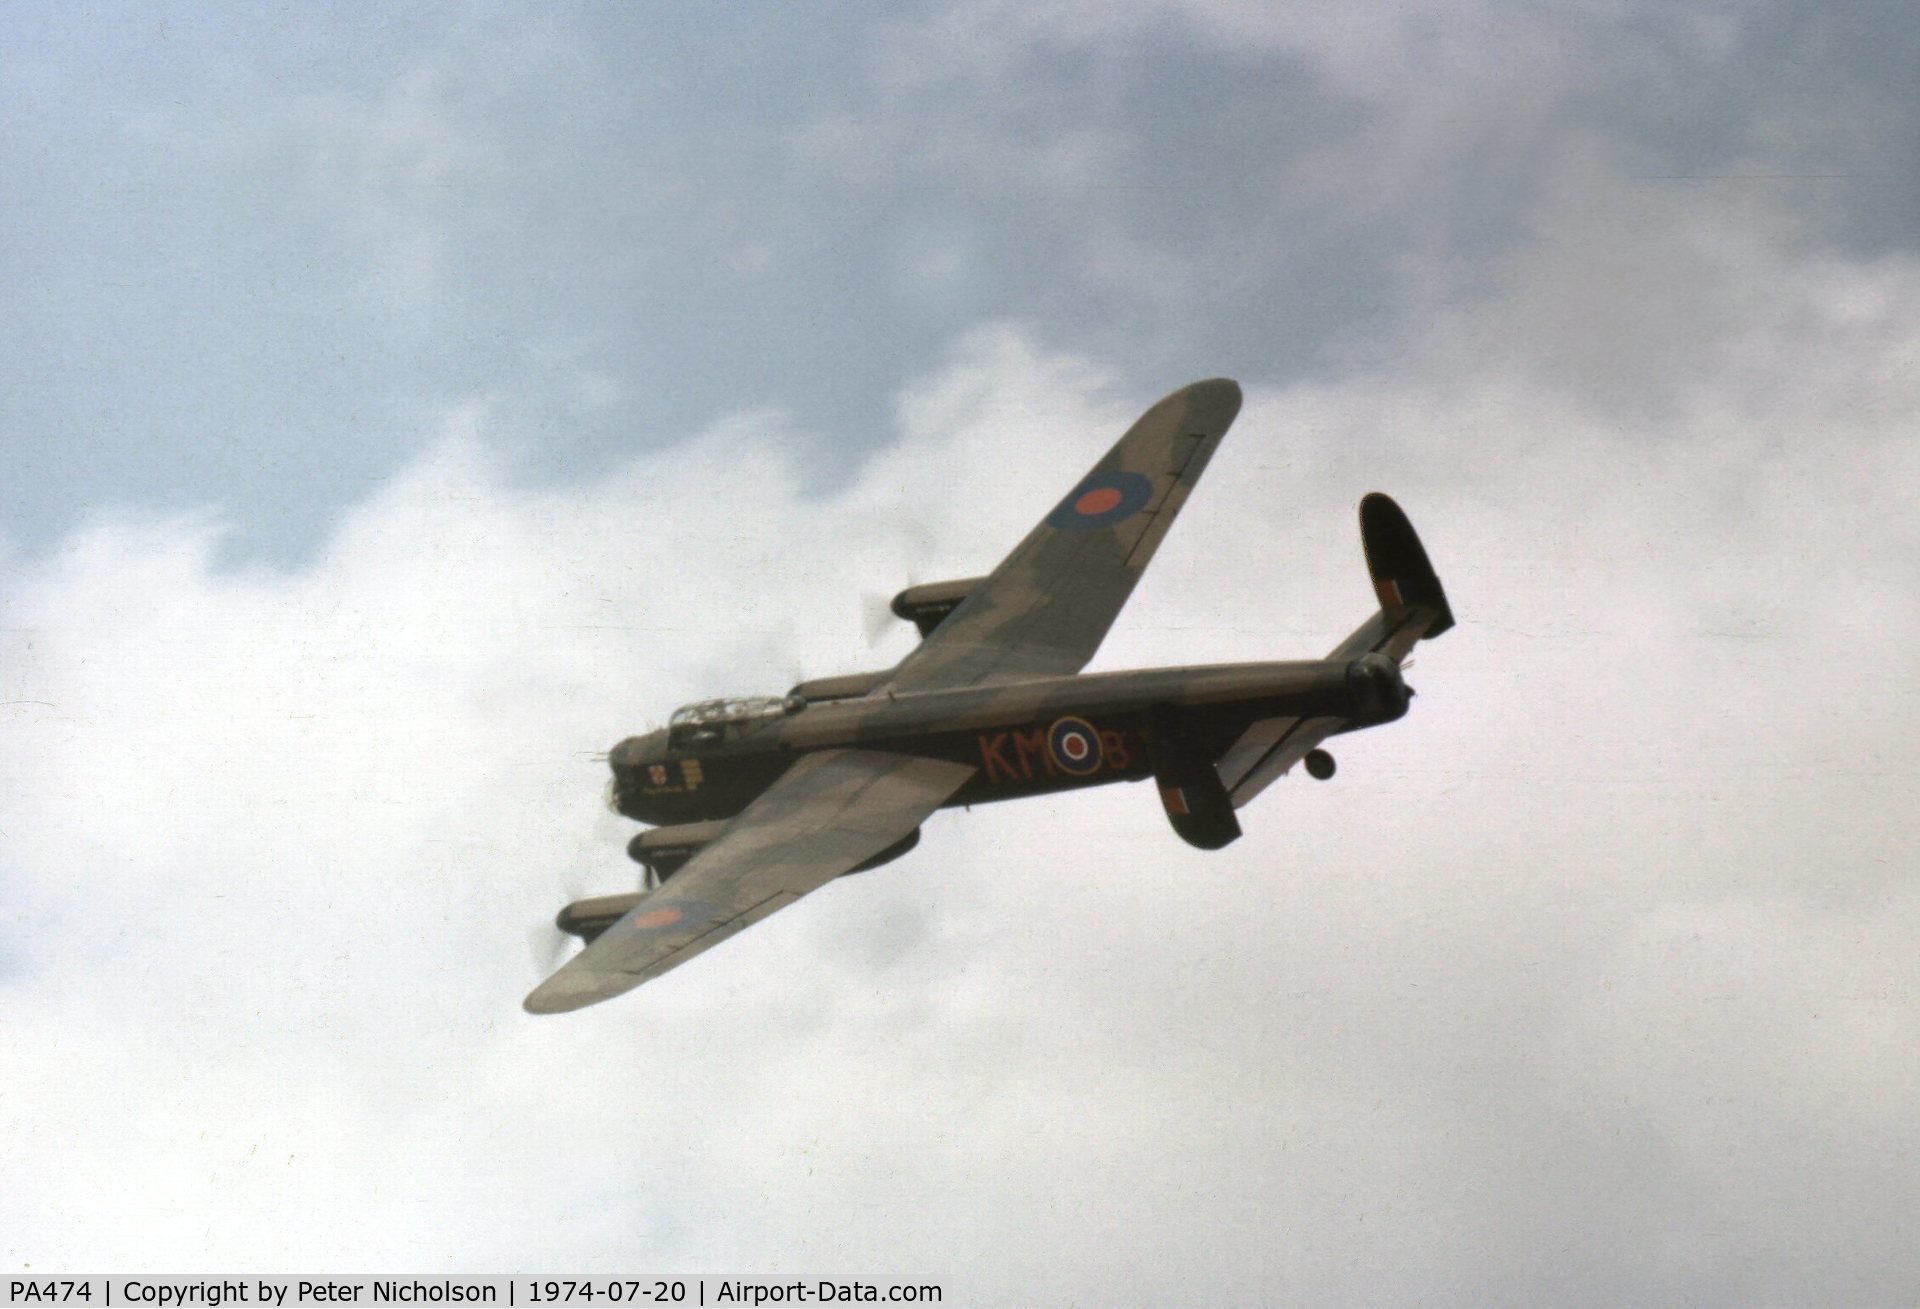 PA474, 1945 Avro 683 Lancaster B1 C/N VACH0052/D2973, The Battle of Britain Memorial Flight Lancaster at the 1974 Leconfield Airshow and clearly showing the mid-upper gunner's turret had not then been fitted.